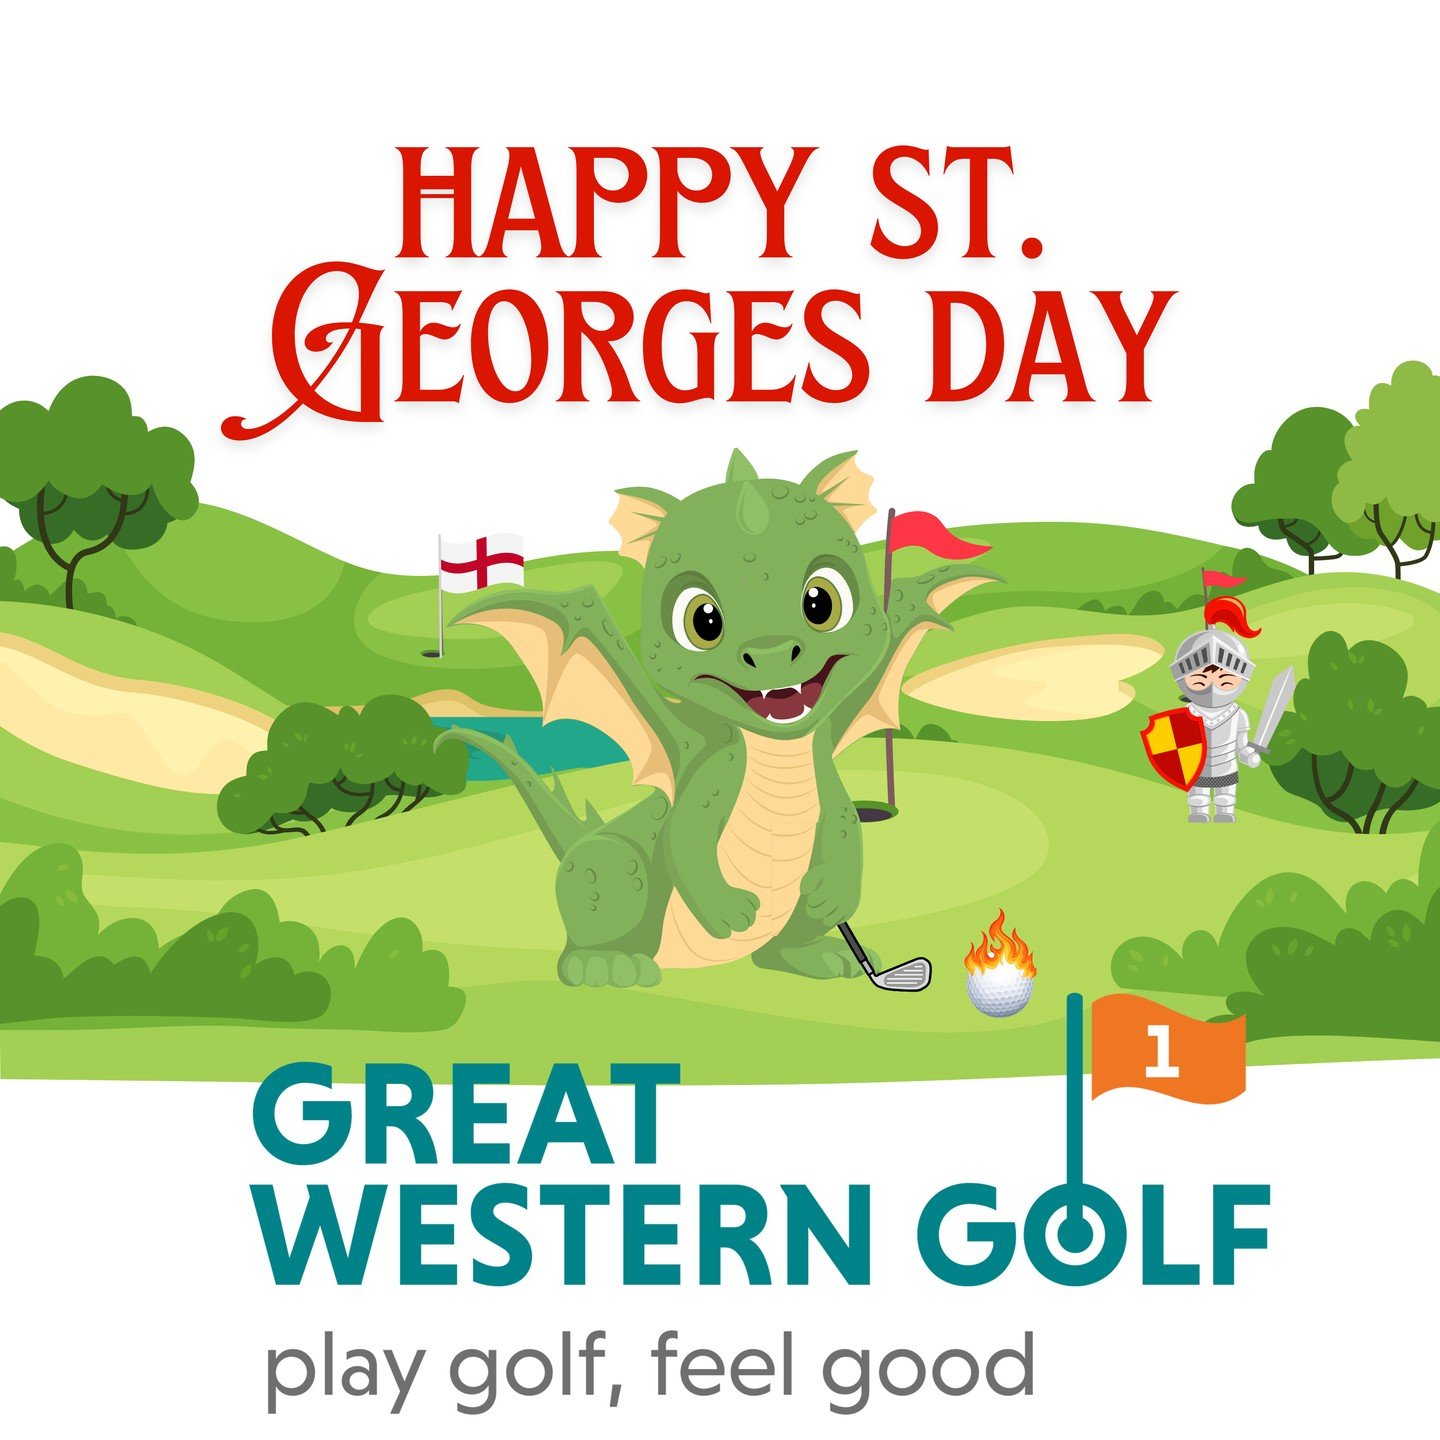 Happy St. Georges Day from all of us here at Great Western Golf!